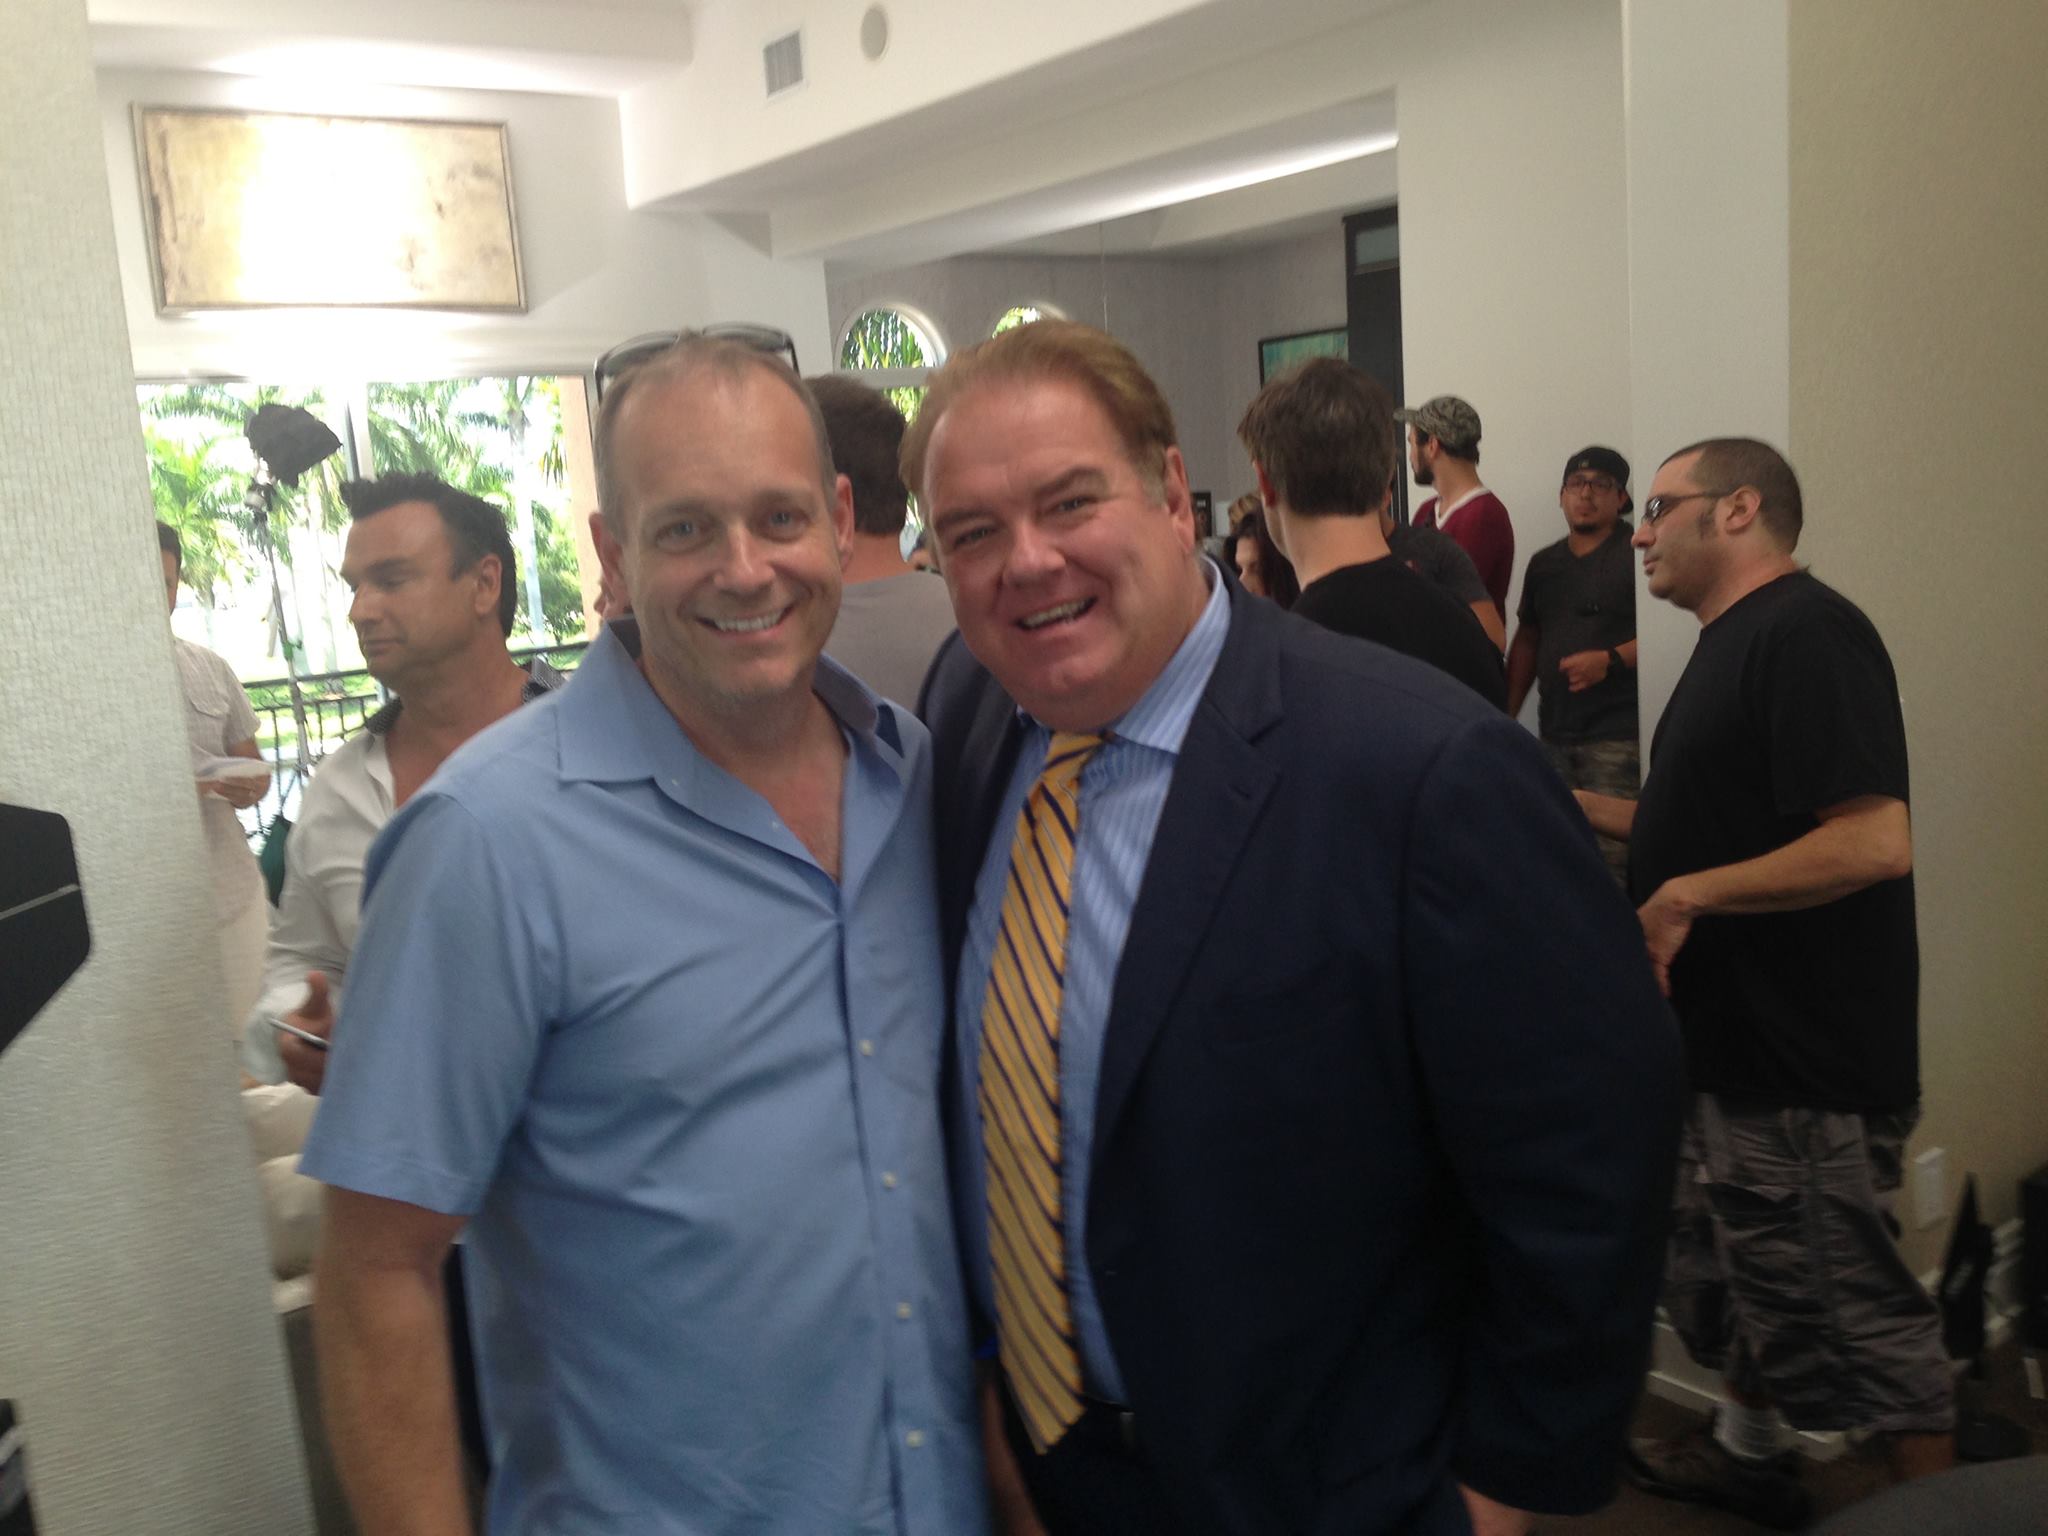 Executive producer and writer Kurt Weichert is on the set of Smothered by Mothers with actor Jim O'Heir.